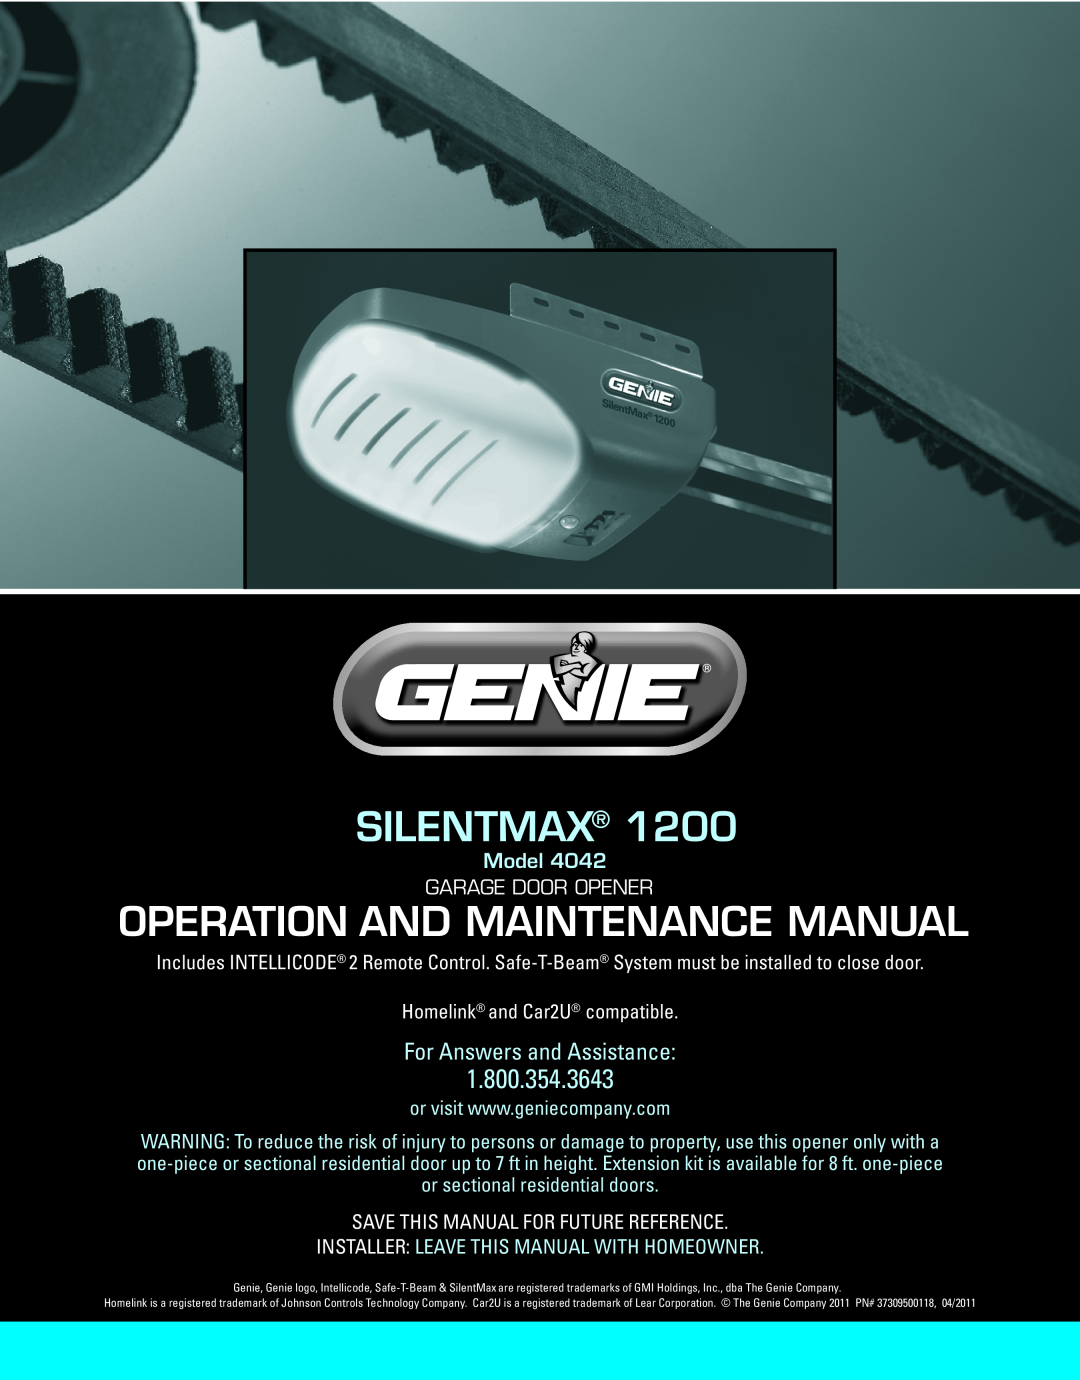 Genie 4042 manual Silentmax, 1.800.354.3643, Garage Door Opener, Homelink and Car2U compatible, For Answers and Assistance 